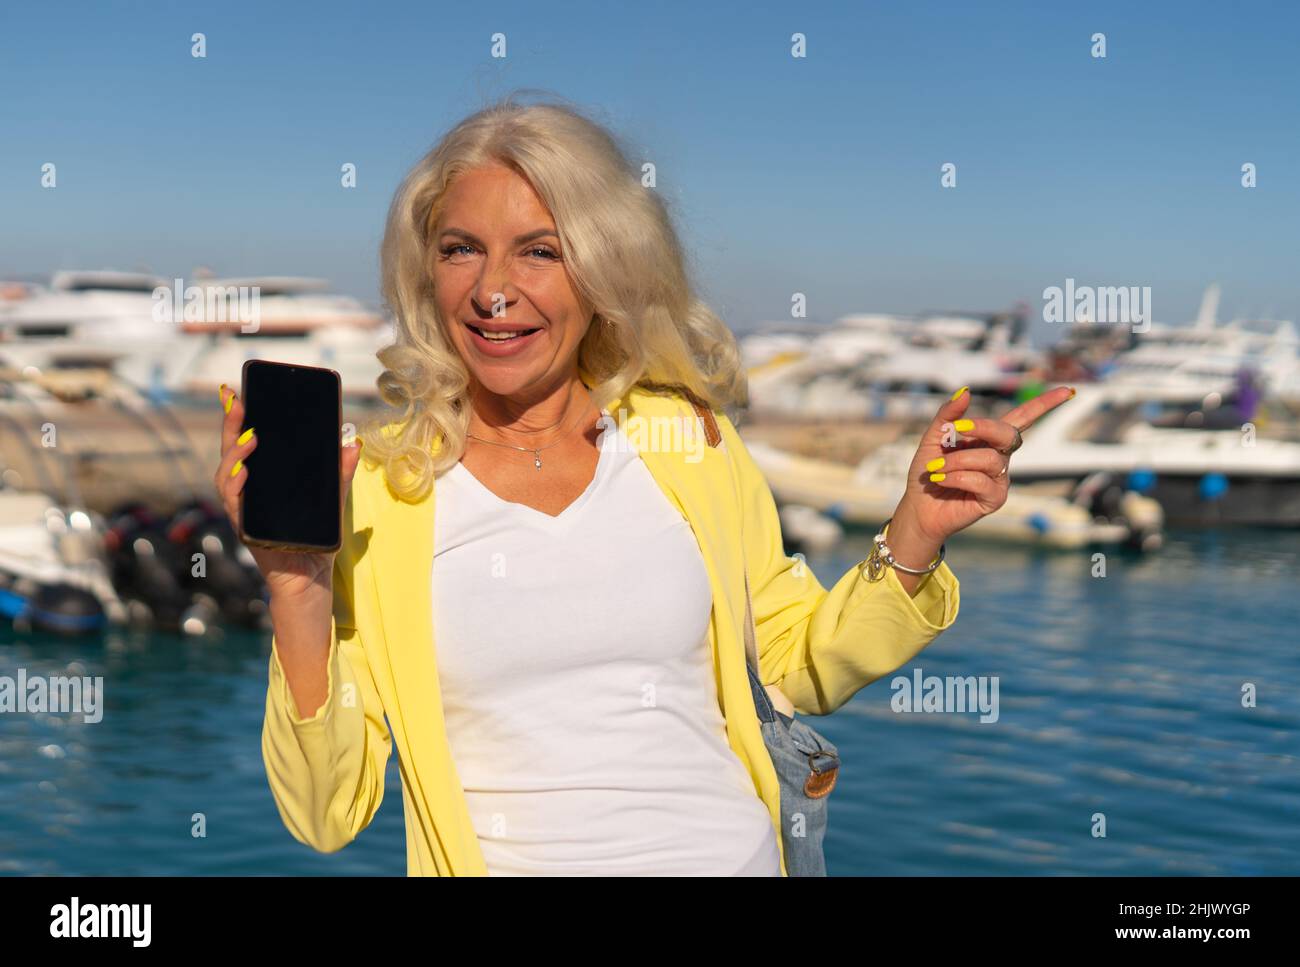 Woman showing smartphone  Stock Photo